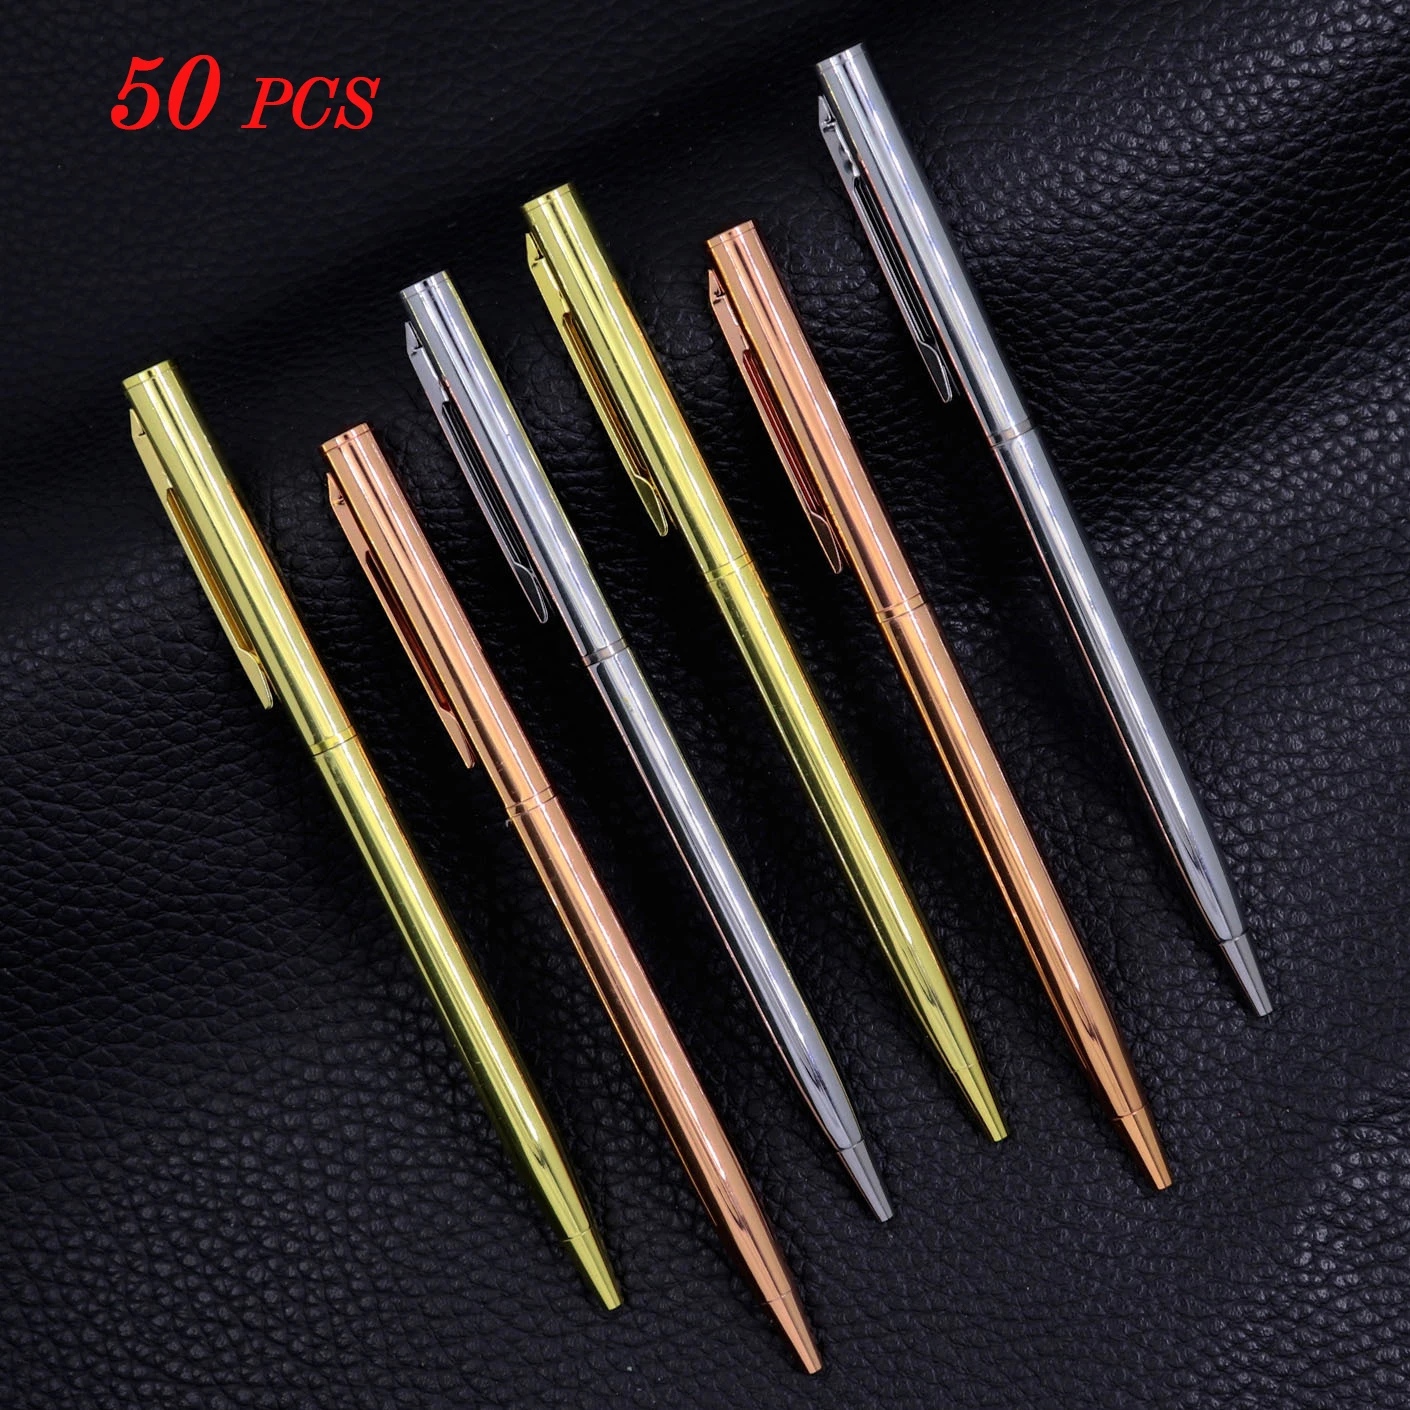 50 Metal Ballpoint Pens, Rose Gold Pens, Customized Logos, Advertising Gifts, Ballpoint Pens, Office Supplies 9 Colors Available